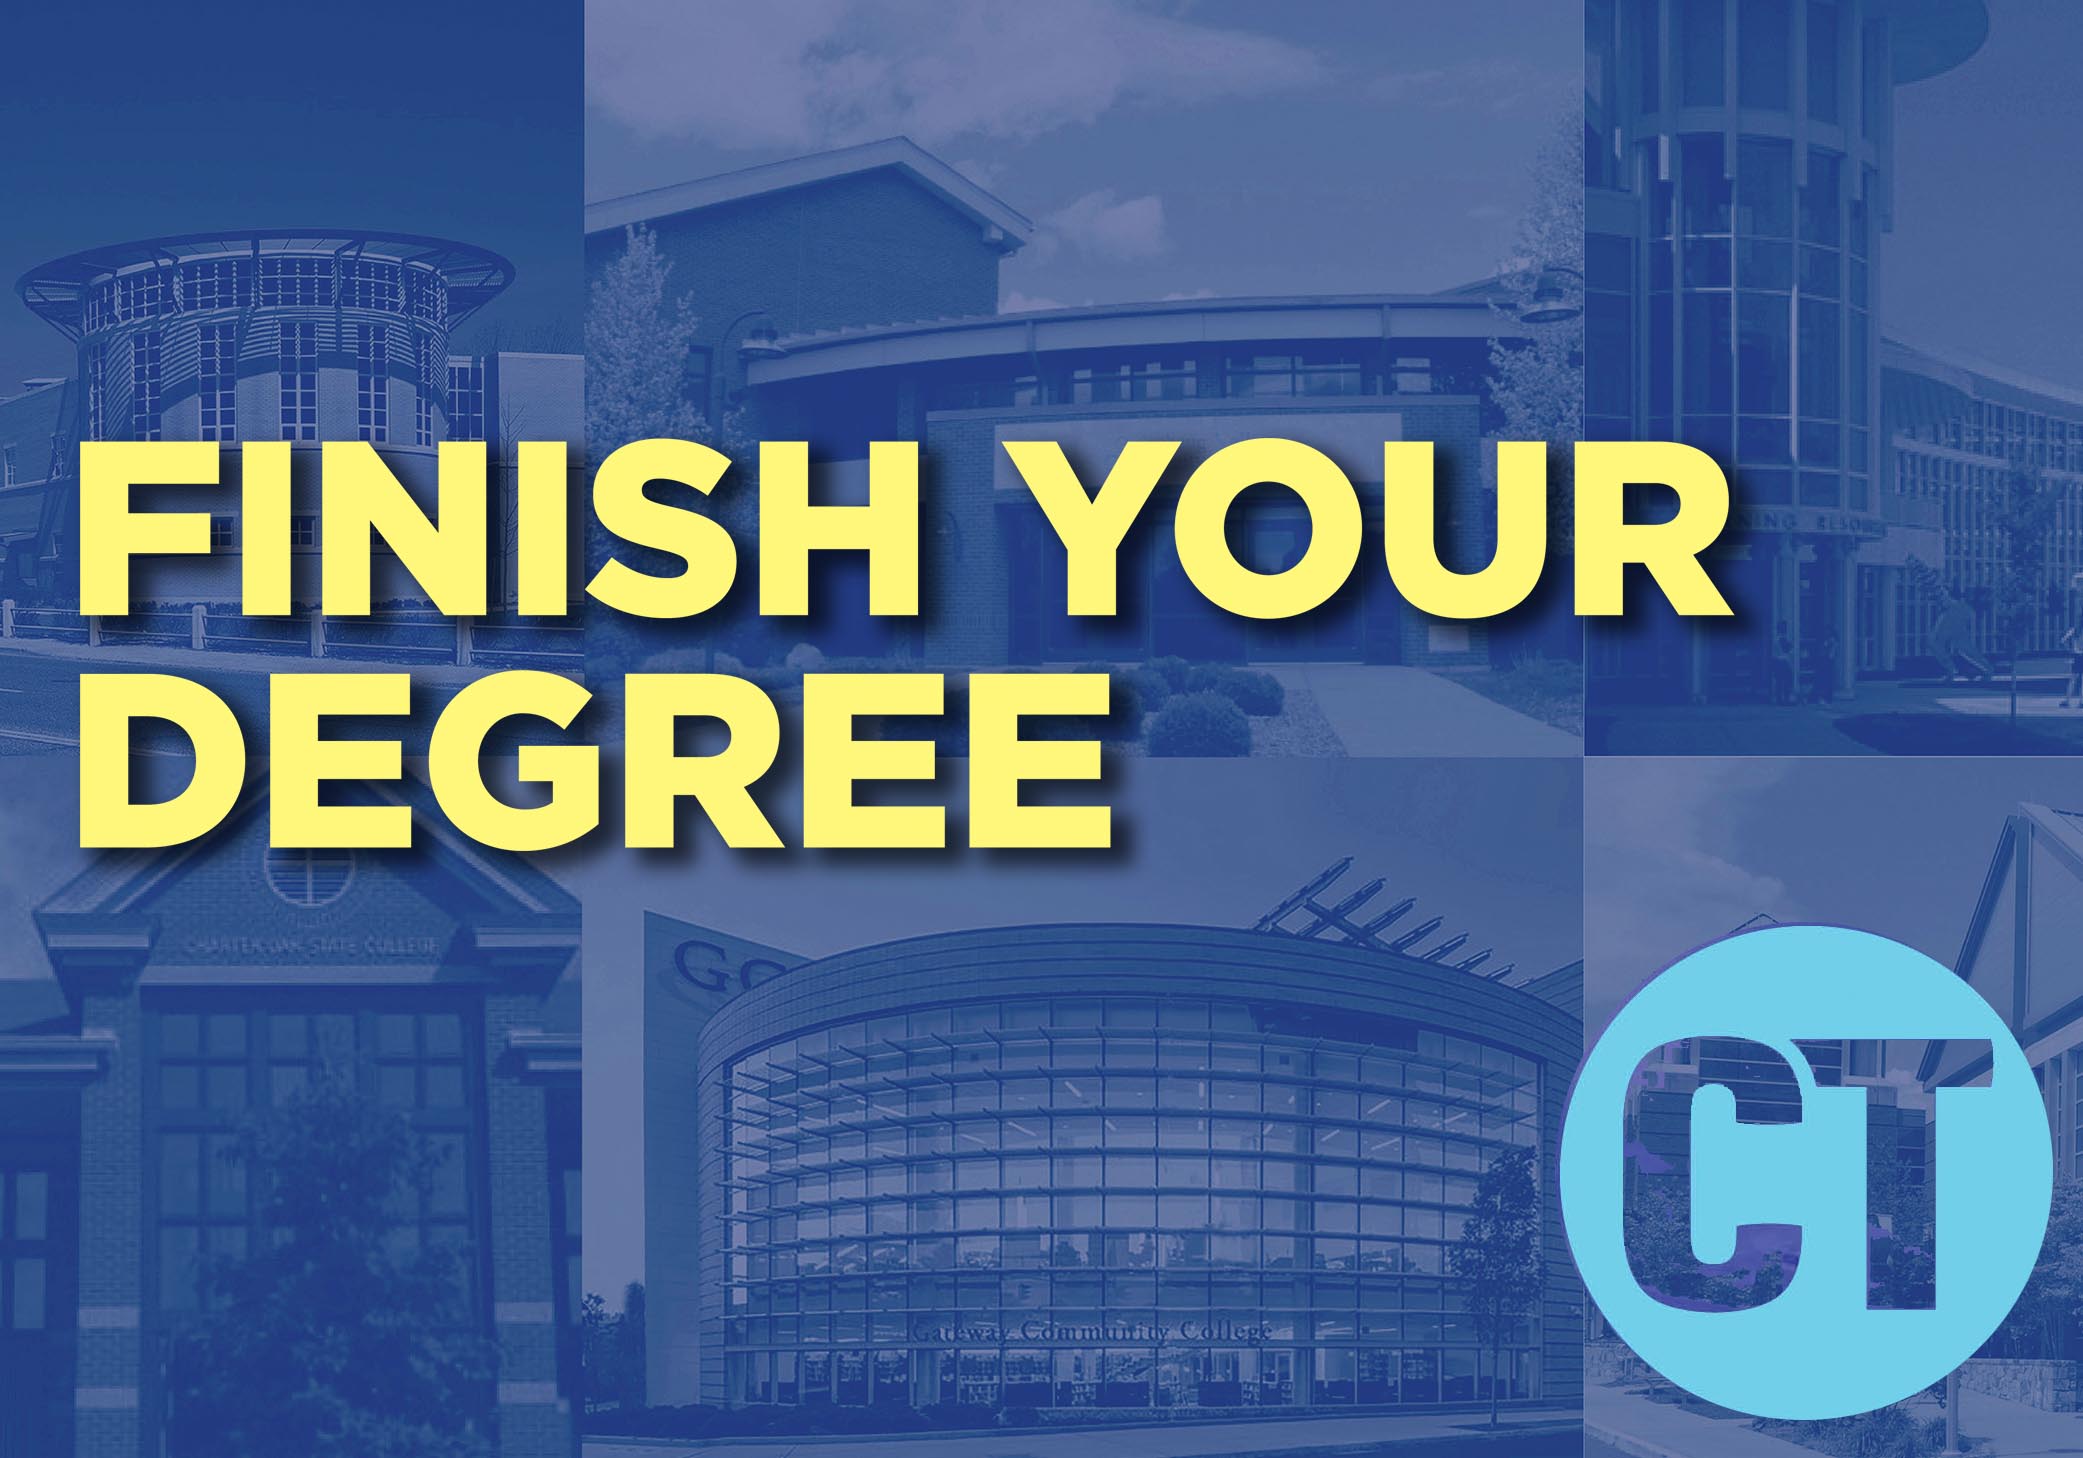 Find out how easy it is to finish your degree!